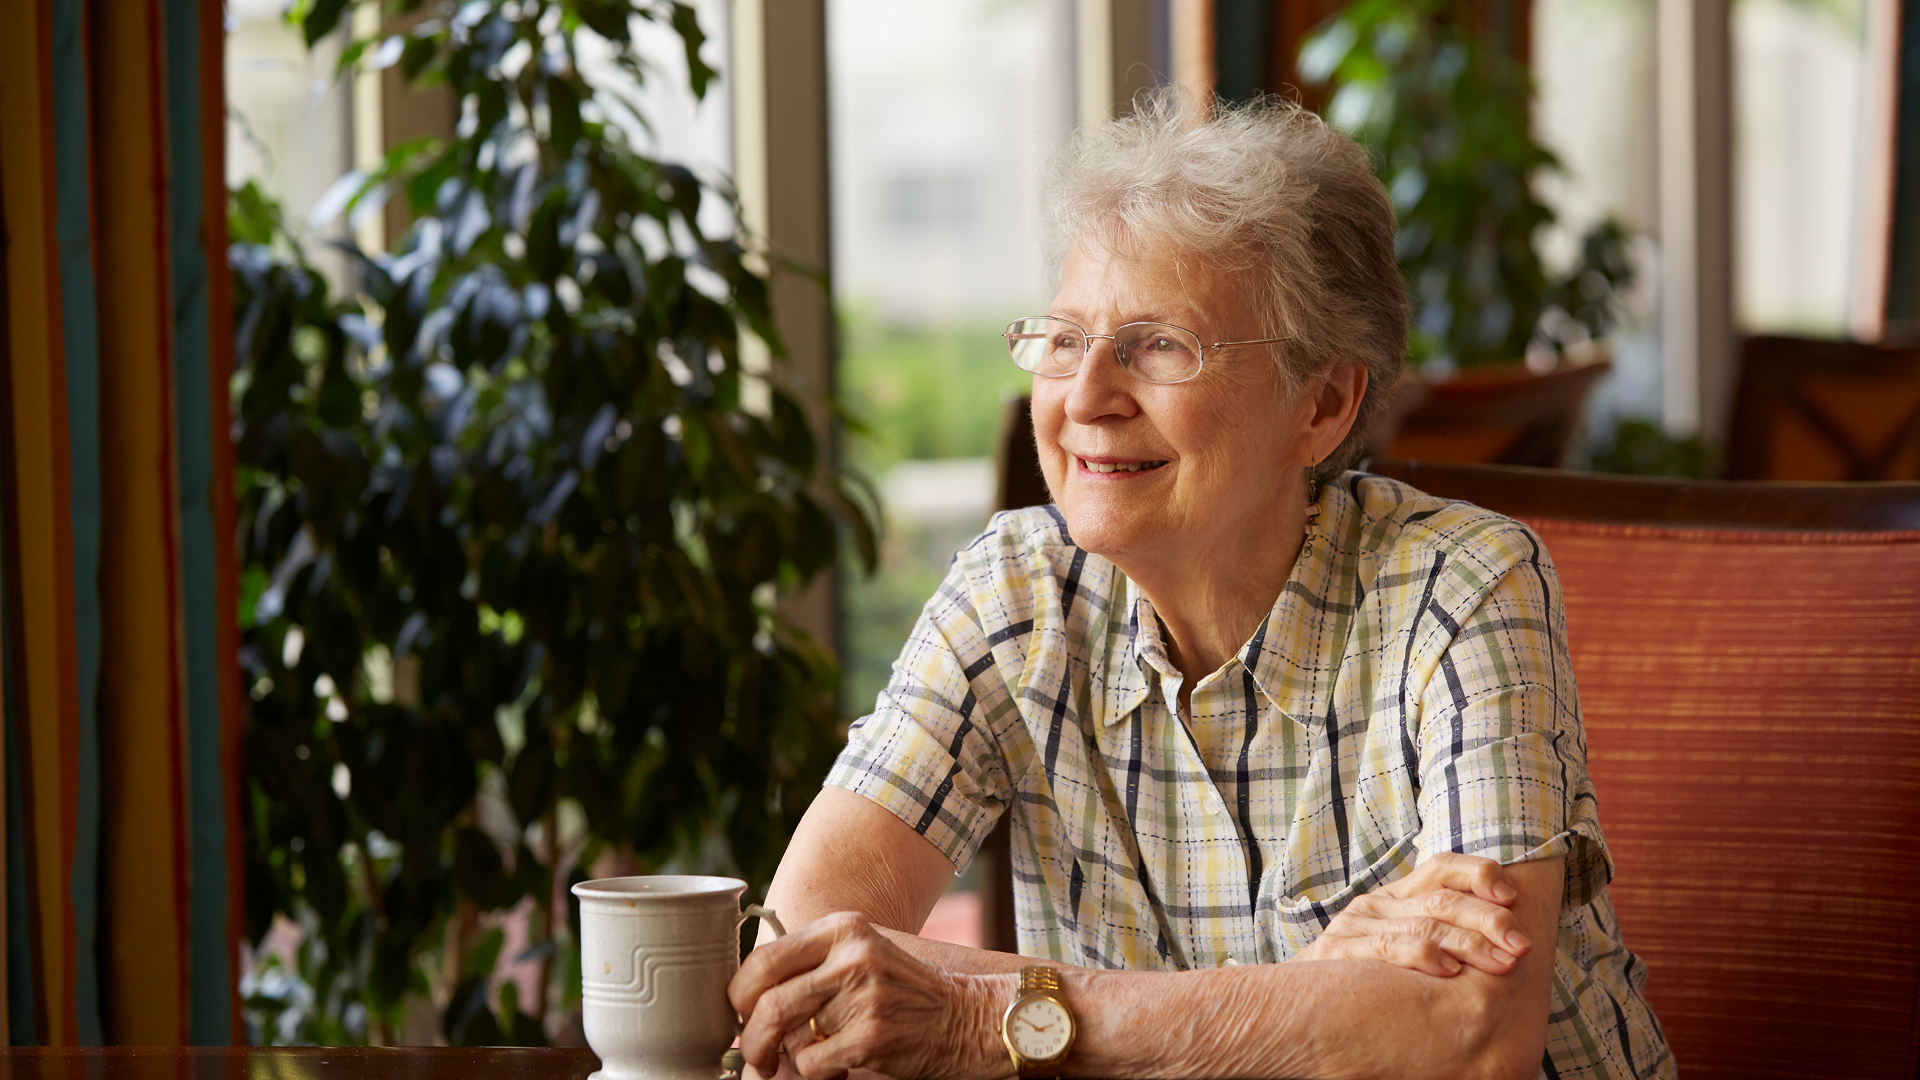 Featured image for “Finding Senior Living That Fits What Matters to You”